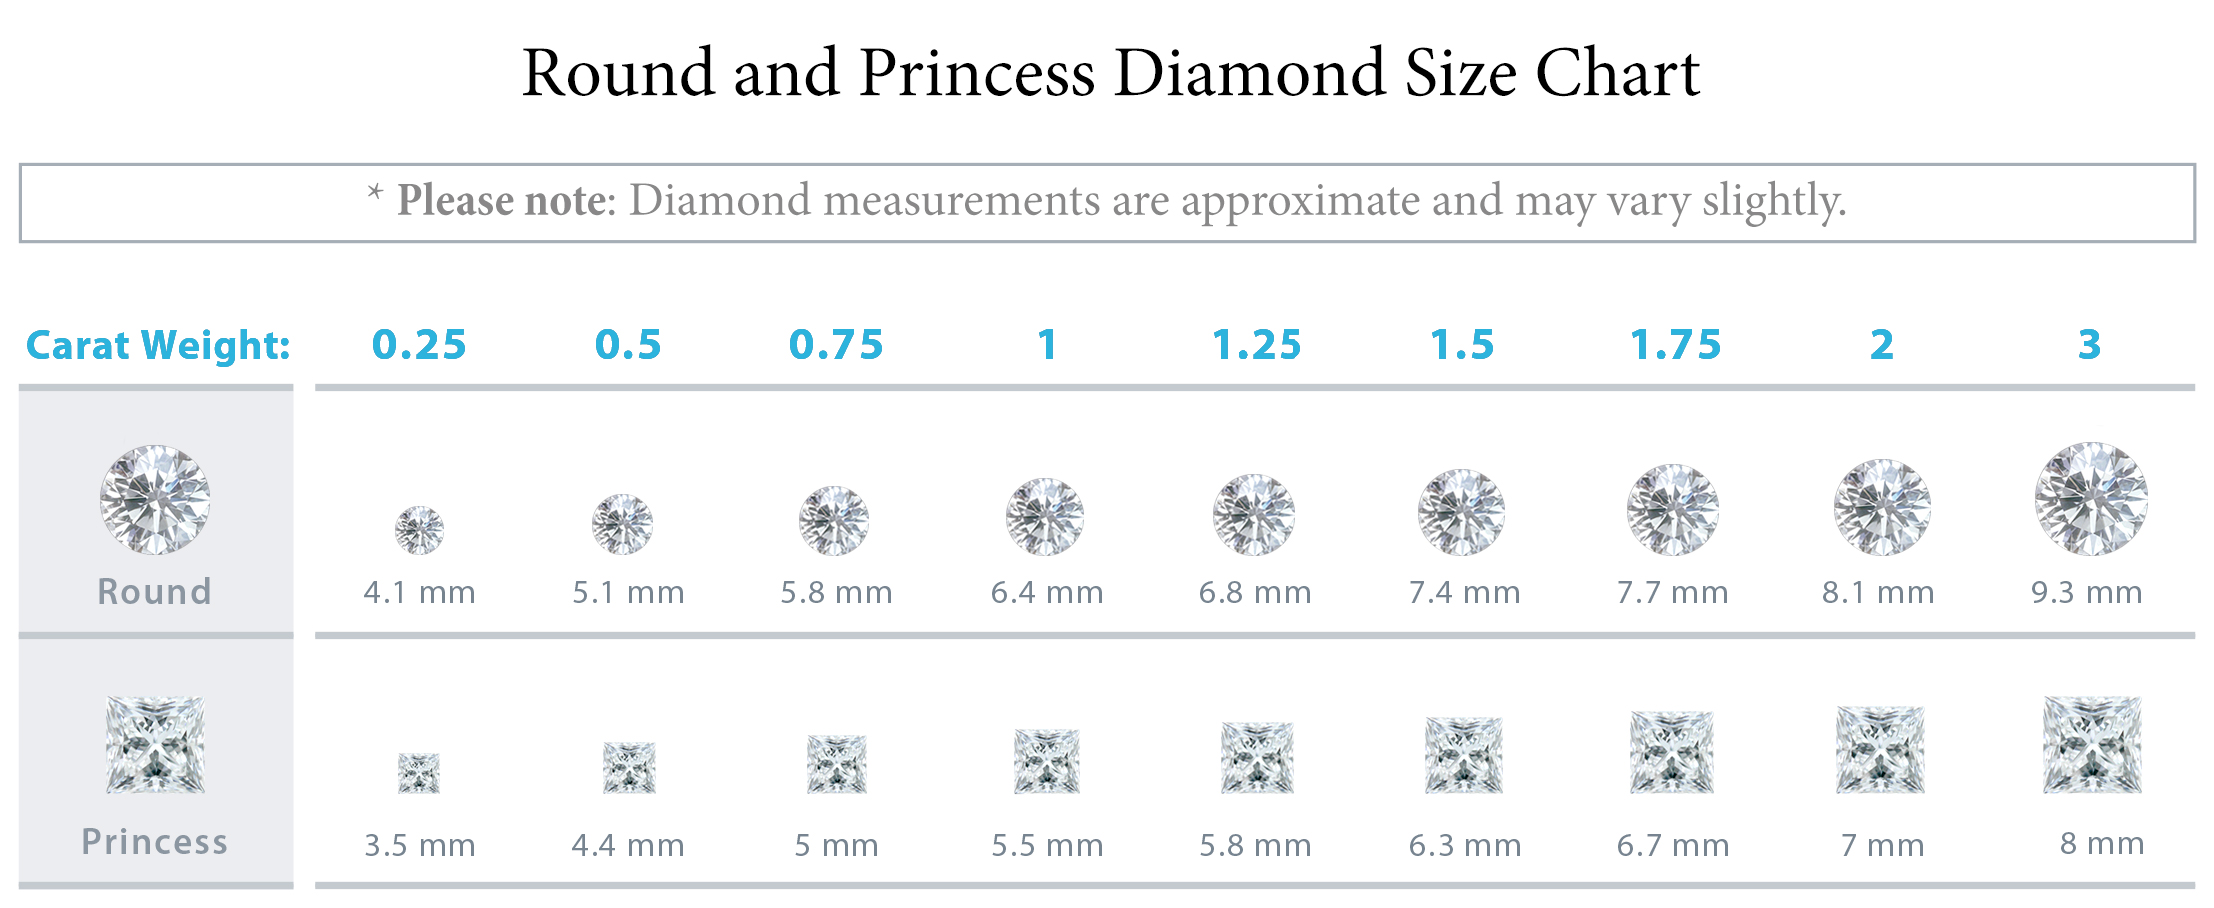 Engagement Ring Clarity Chart